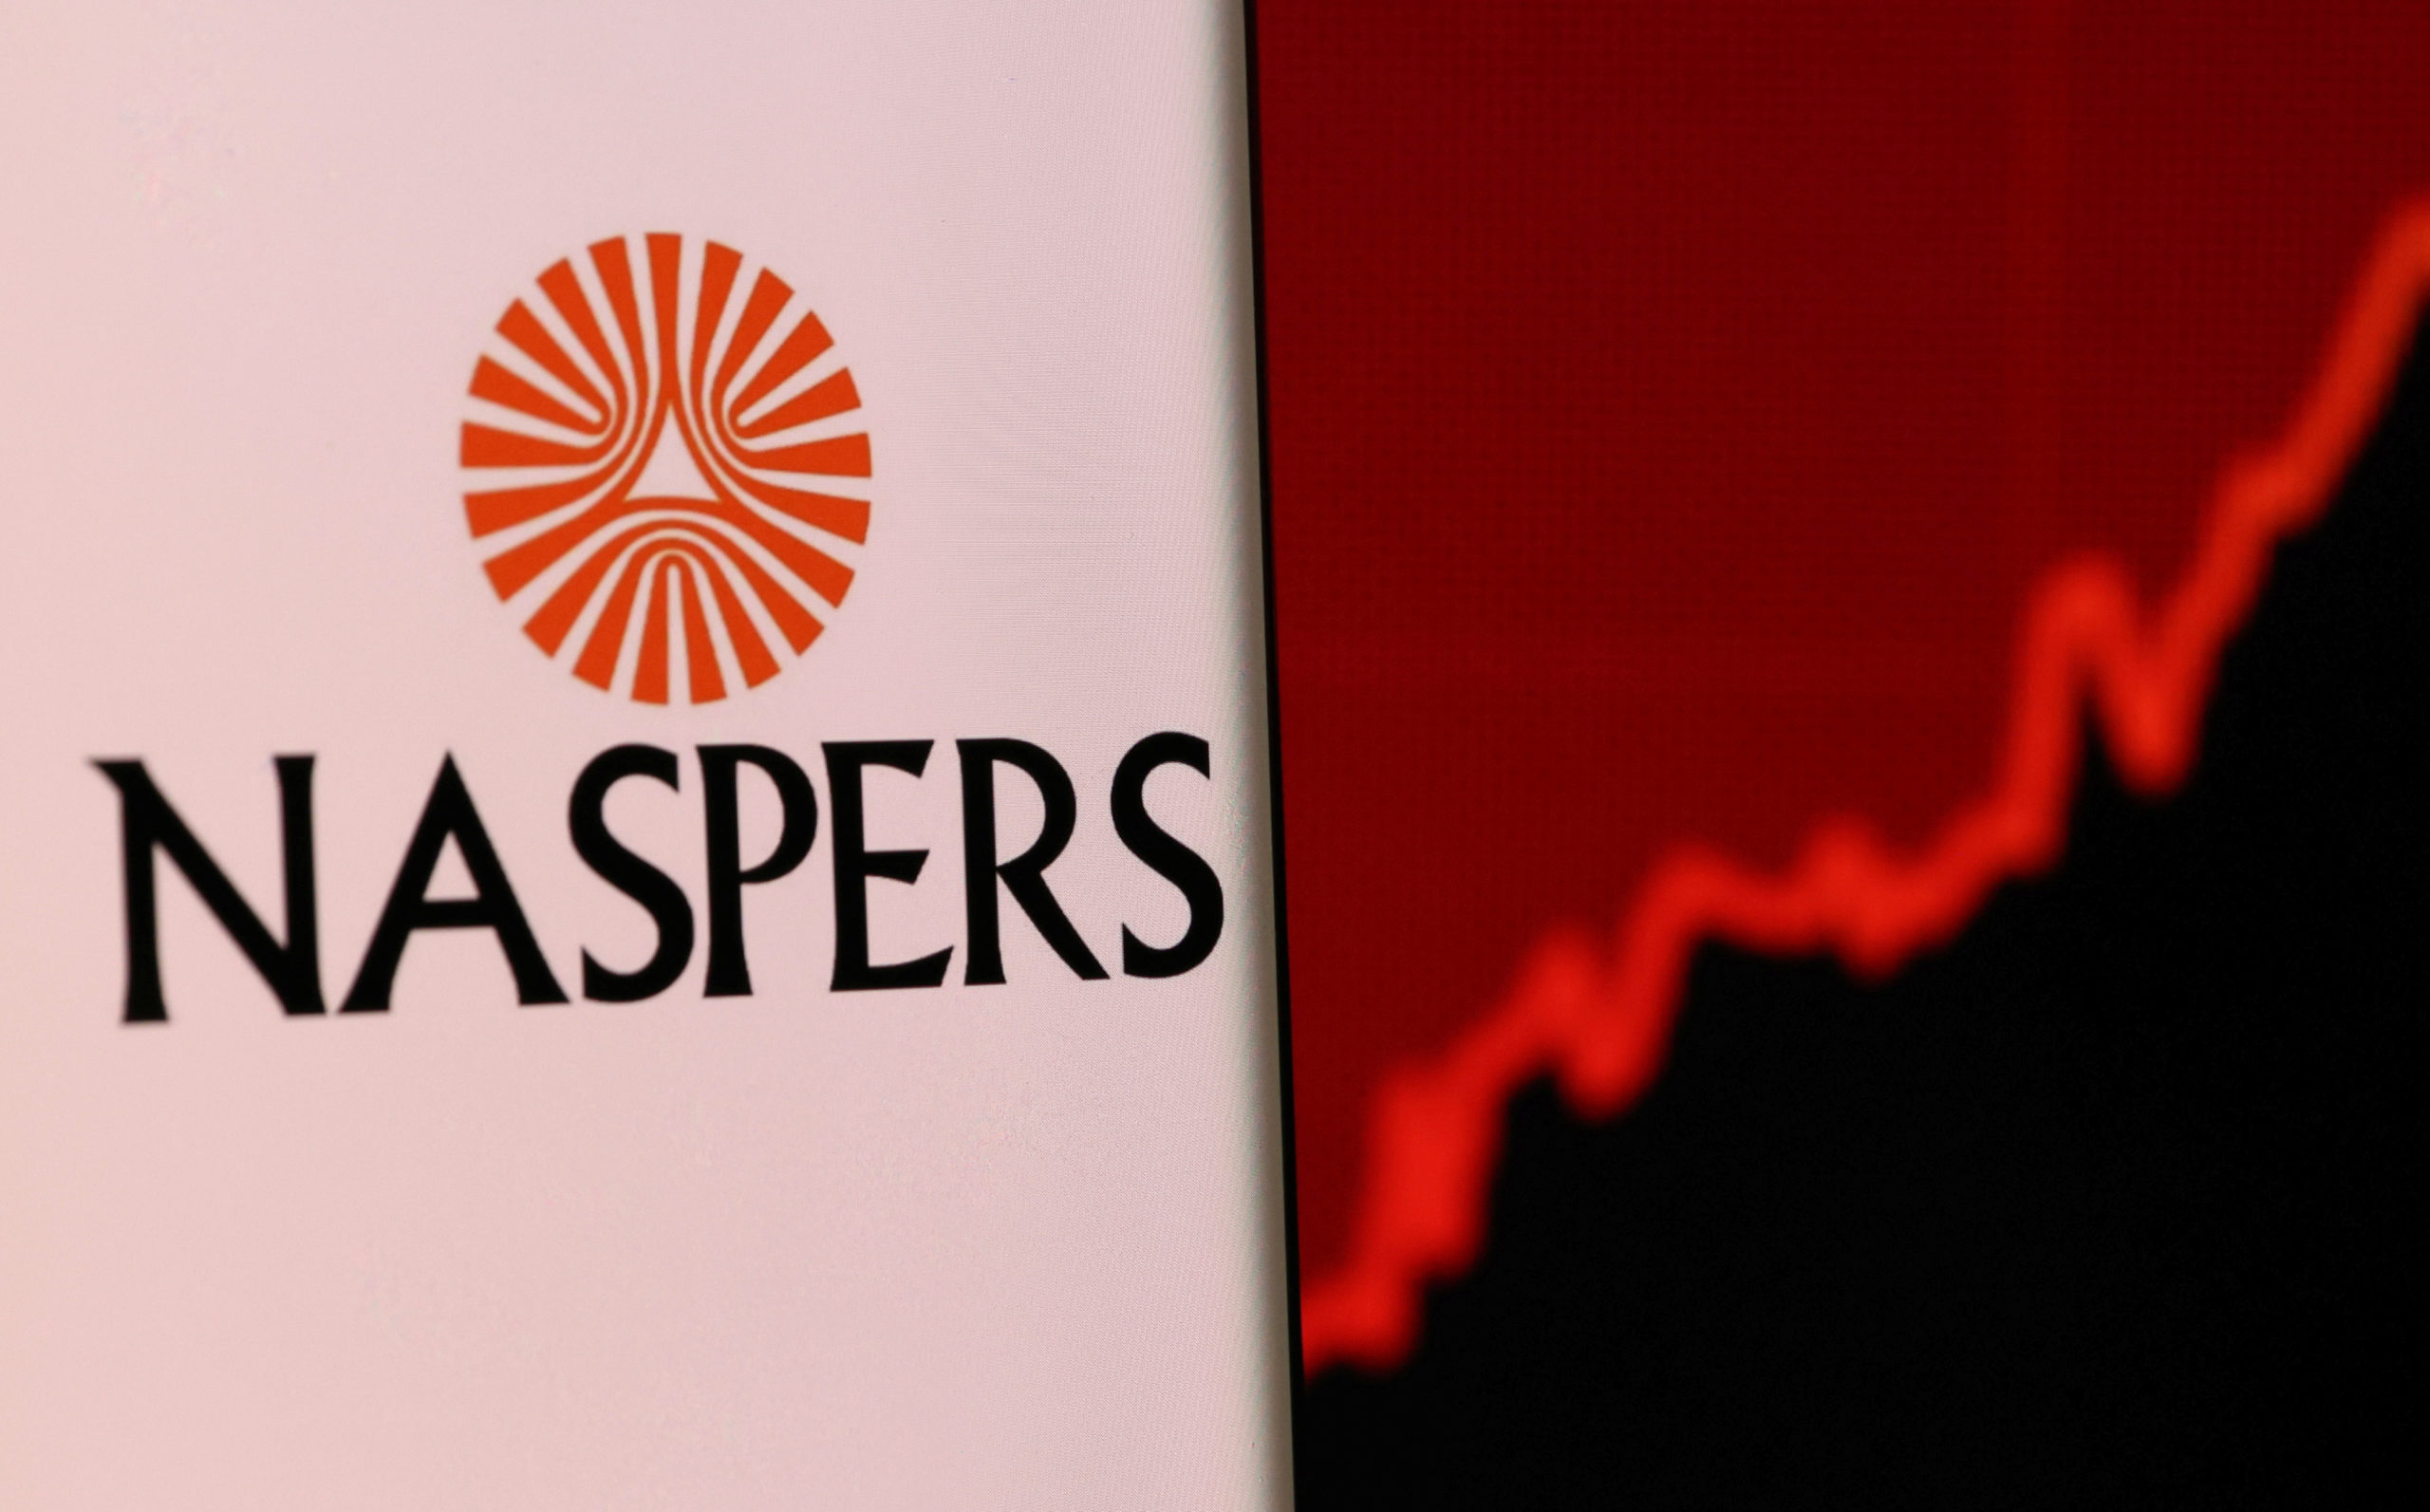 Naspers Prosus Sells Out Stake In Chinese Tech Giant Tencent Radarr